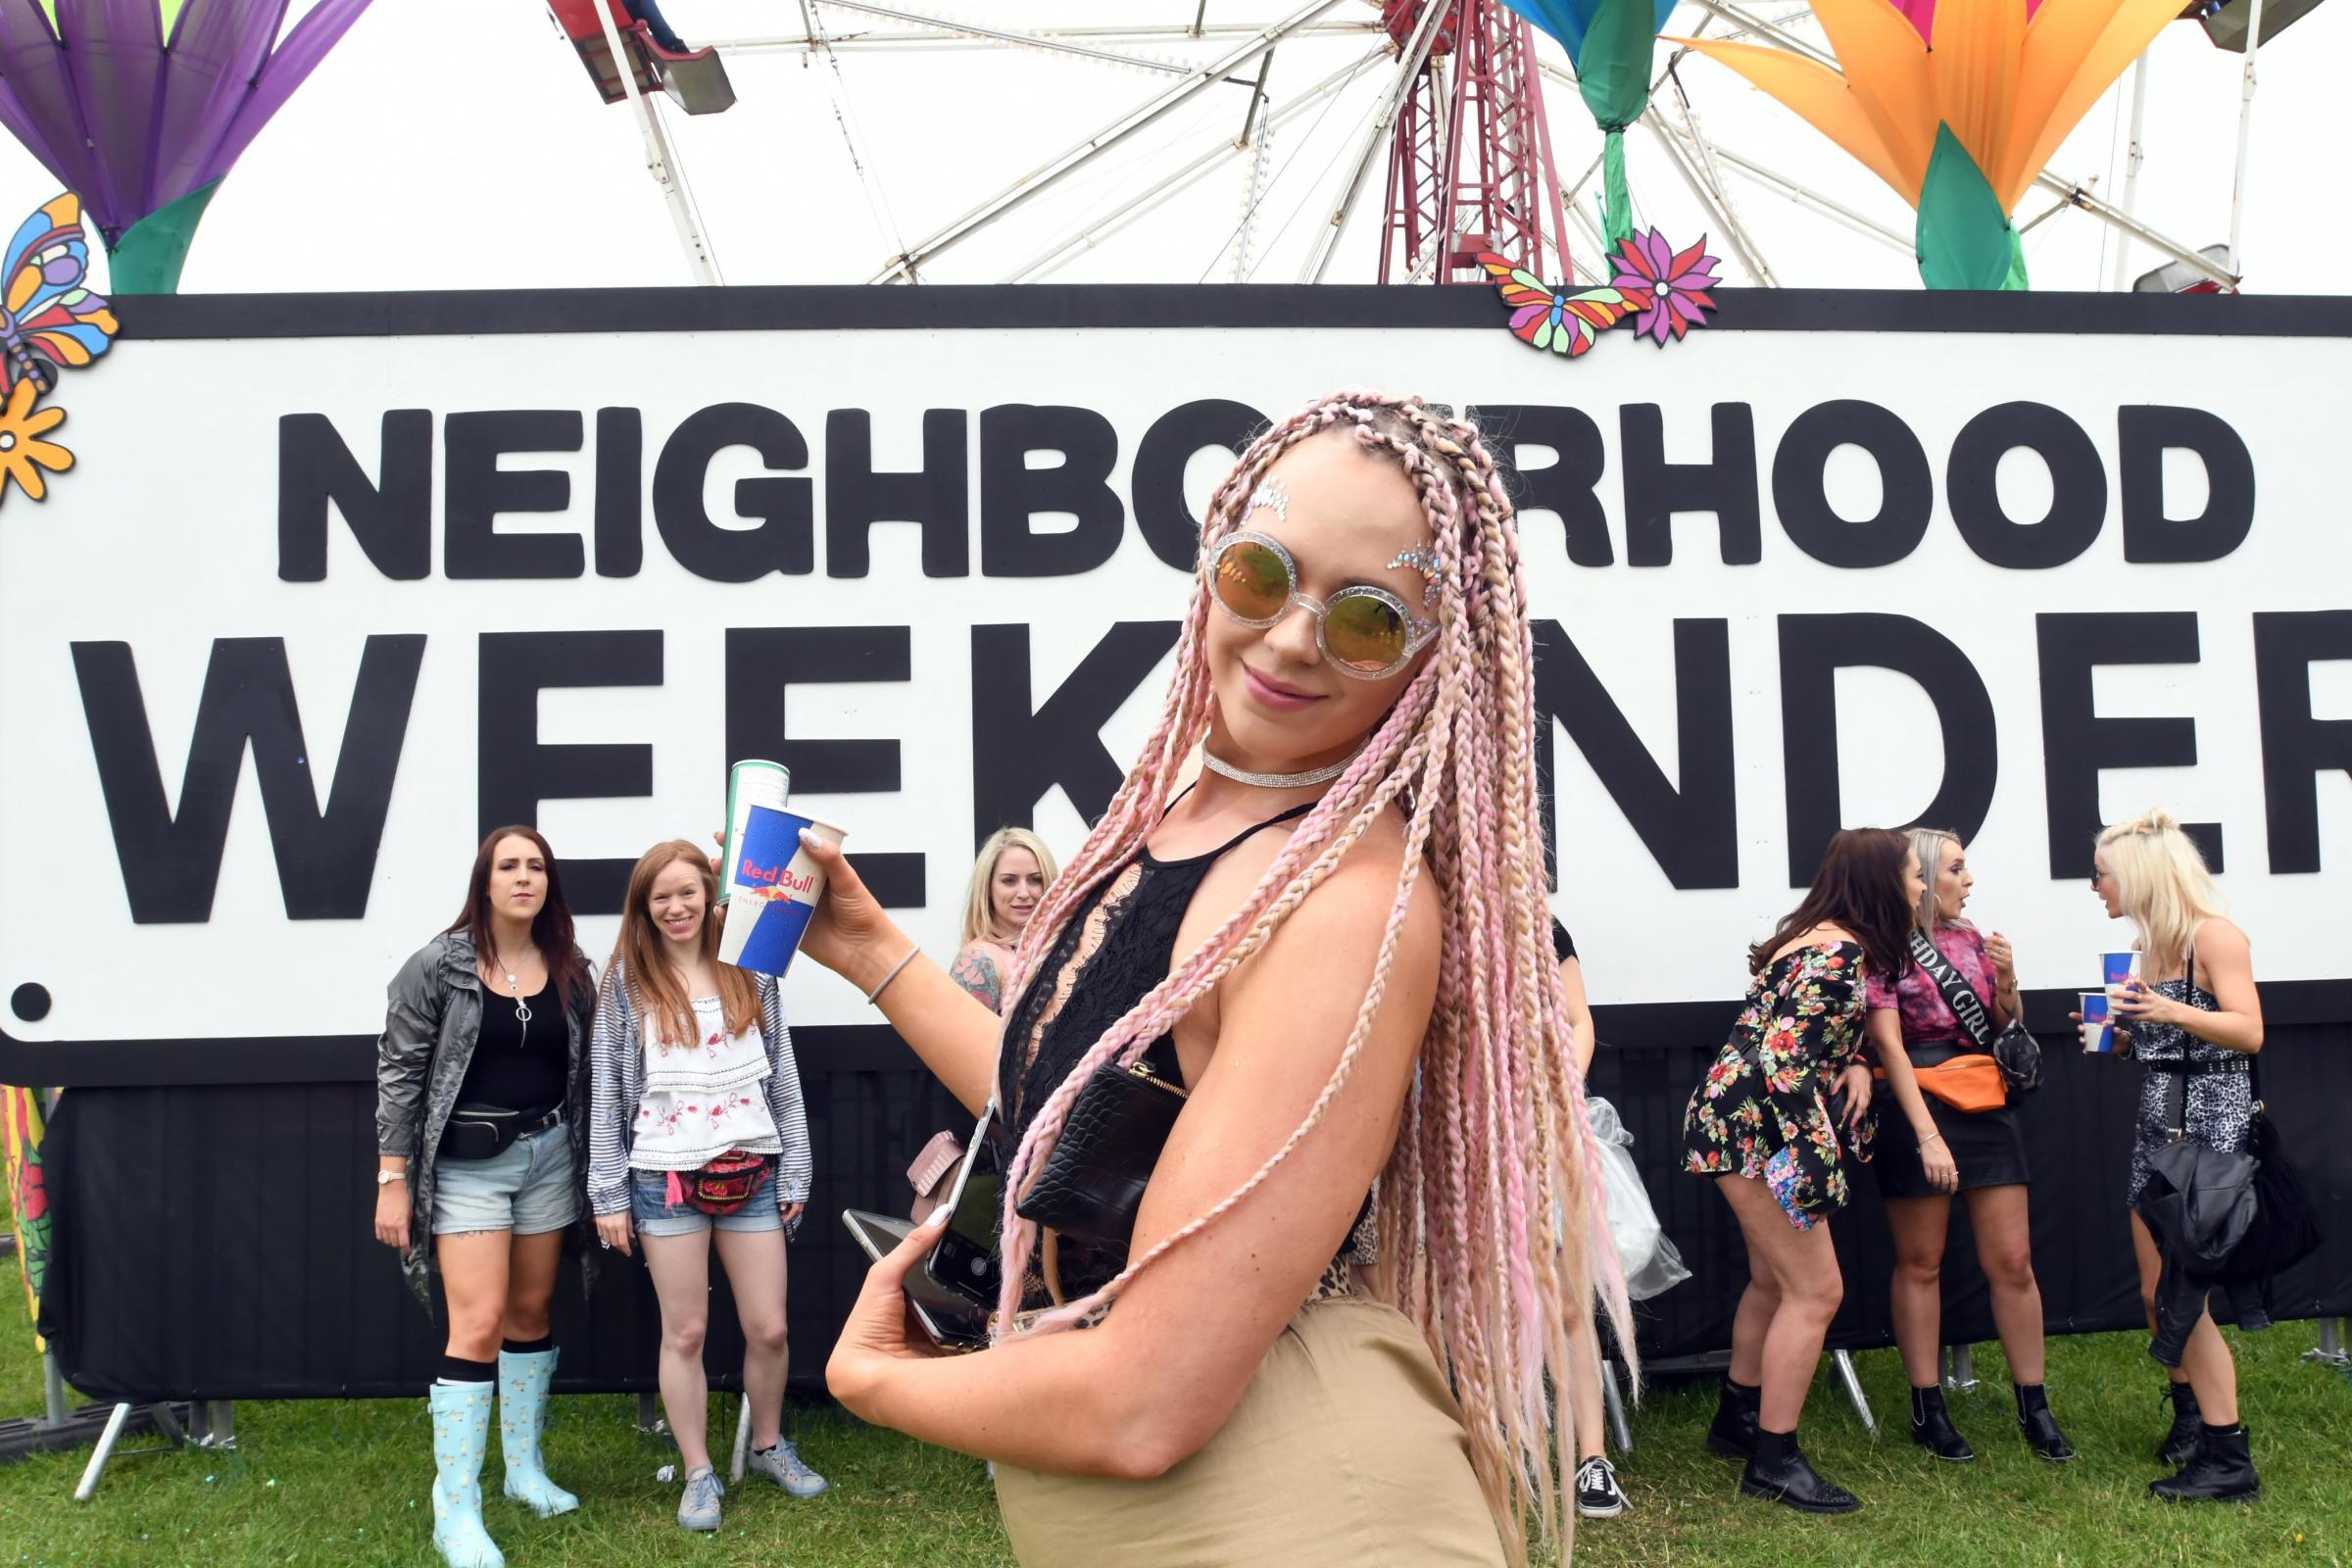 Pre-sale tickets for Neighbourhood Weekender have sold out